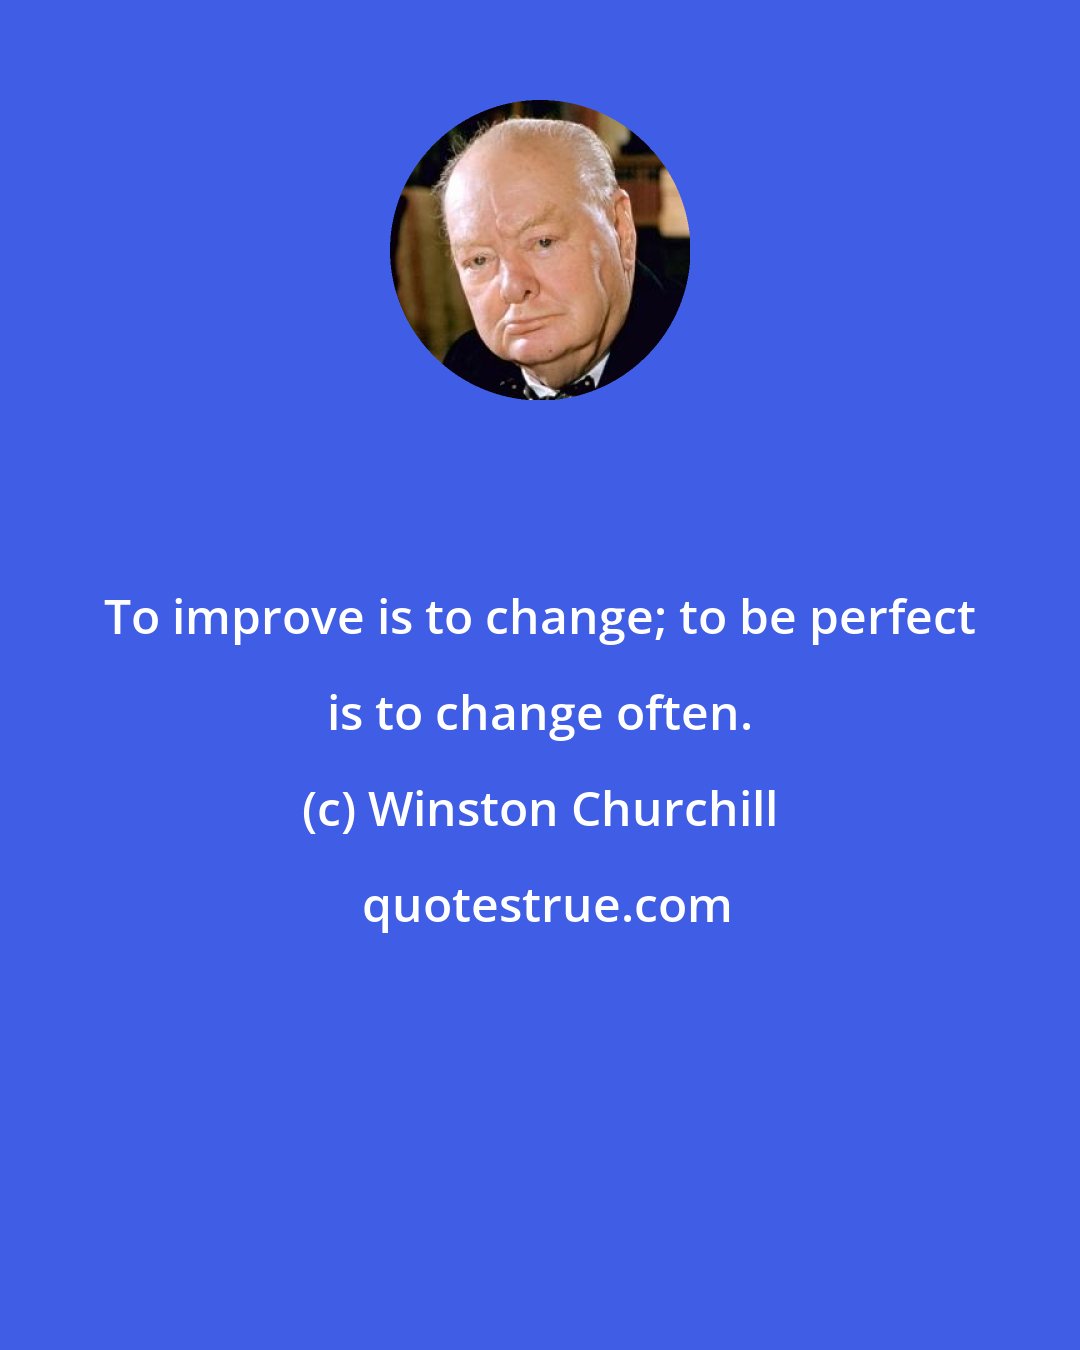 Winston Churchill: To improve is to change; to be perfect is to change often.